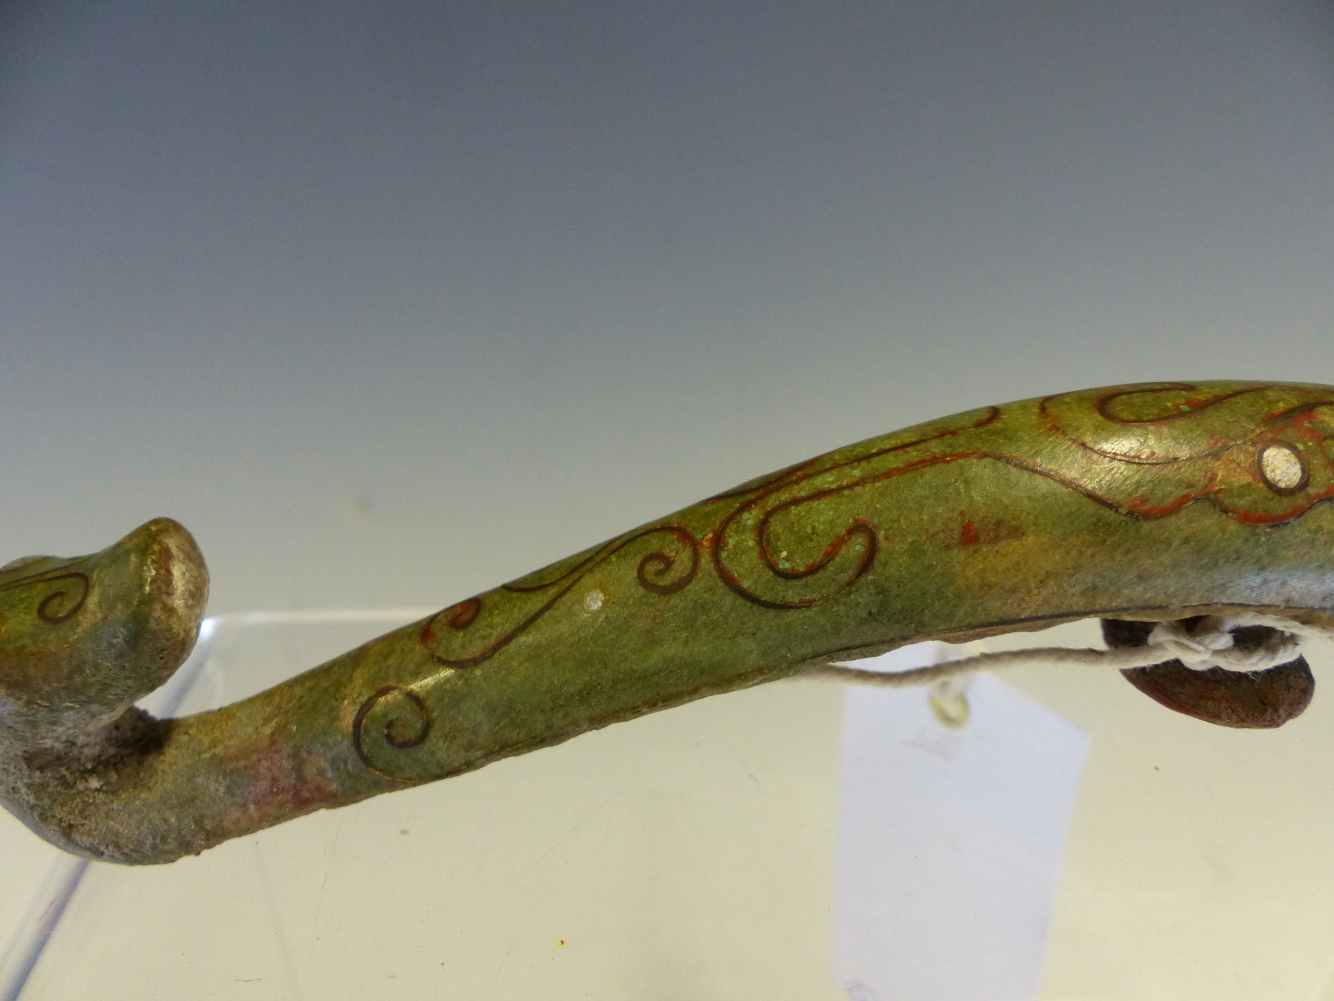 AN EARLY CHINESE BRONZE BELT HOOK, THE DRAGON FORM INLAID WITH COPPER WIRE AND SILVER STIPPLES. - Image 3 of 8